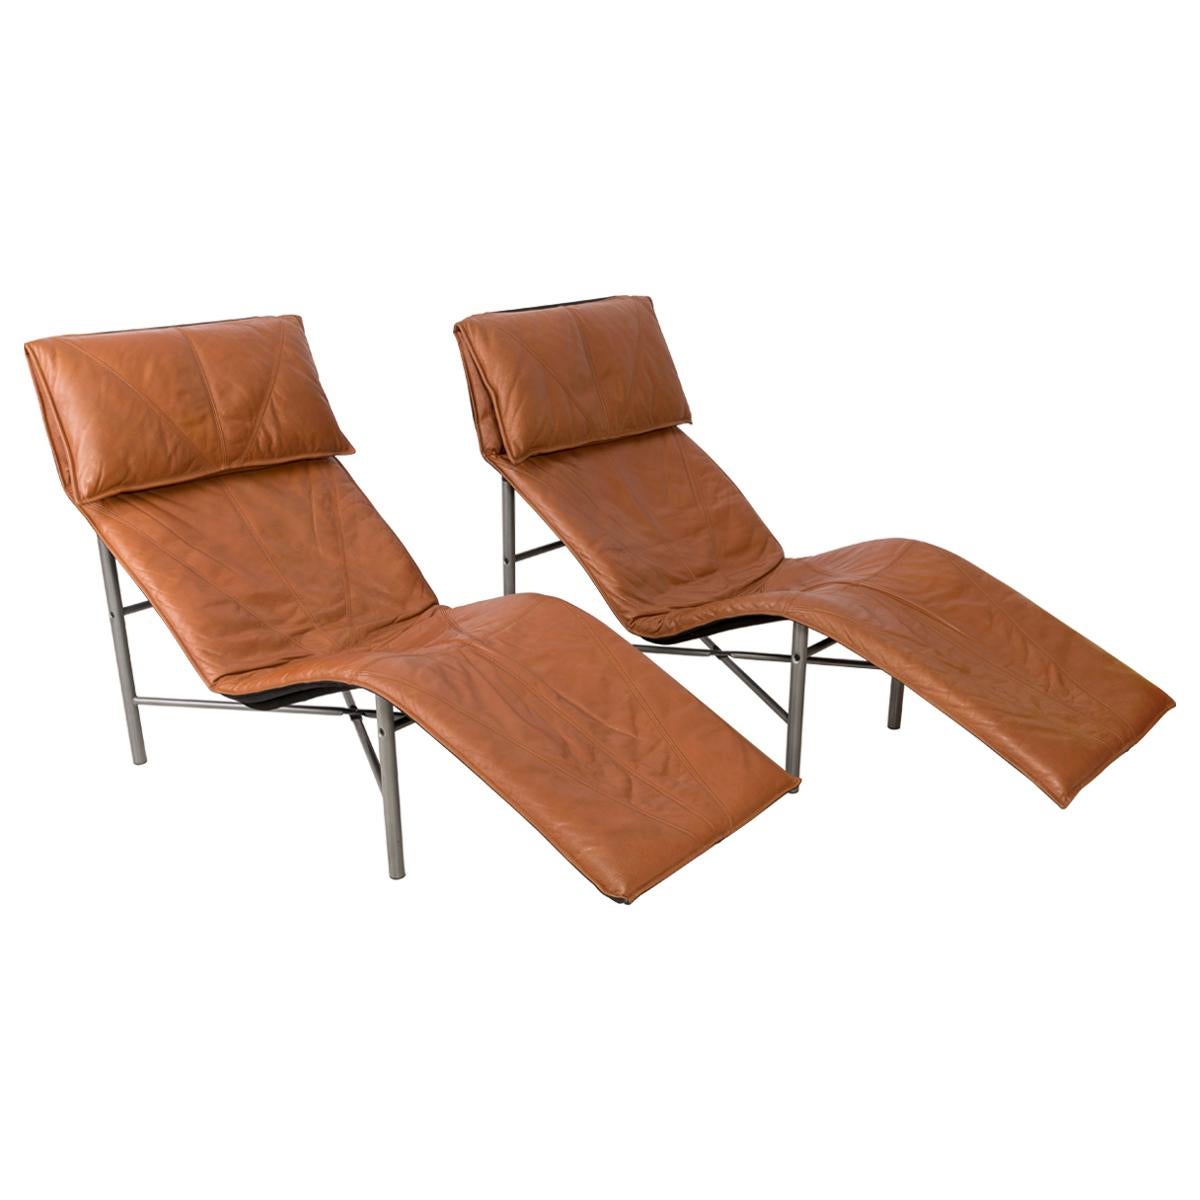 Two Midcentury Danish Modern Leather Chaise Lounge Chairs, Tord Björklund, 1980 For Sale